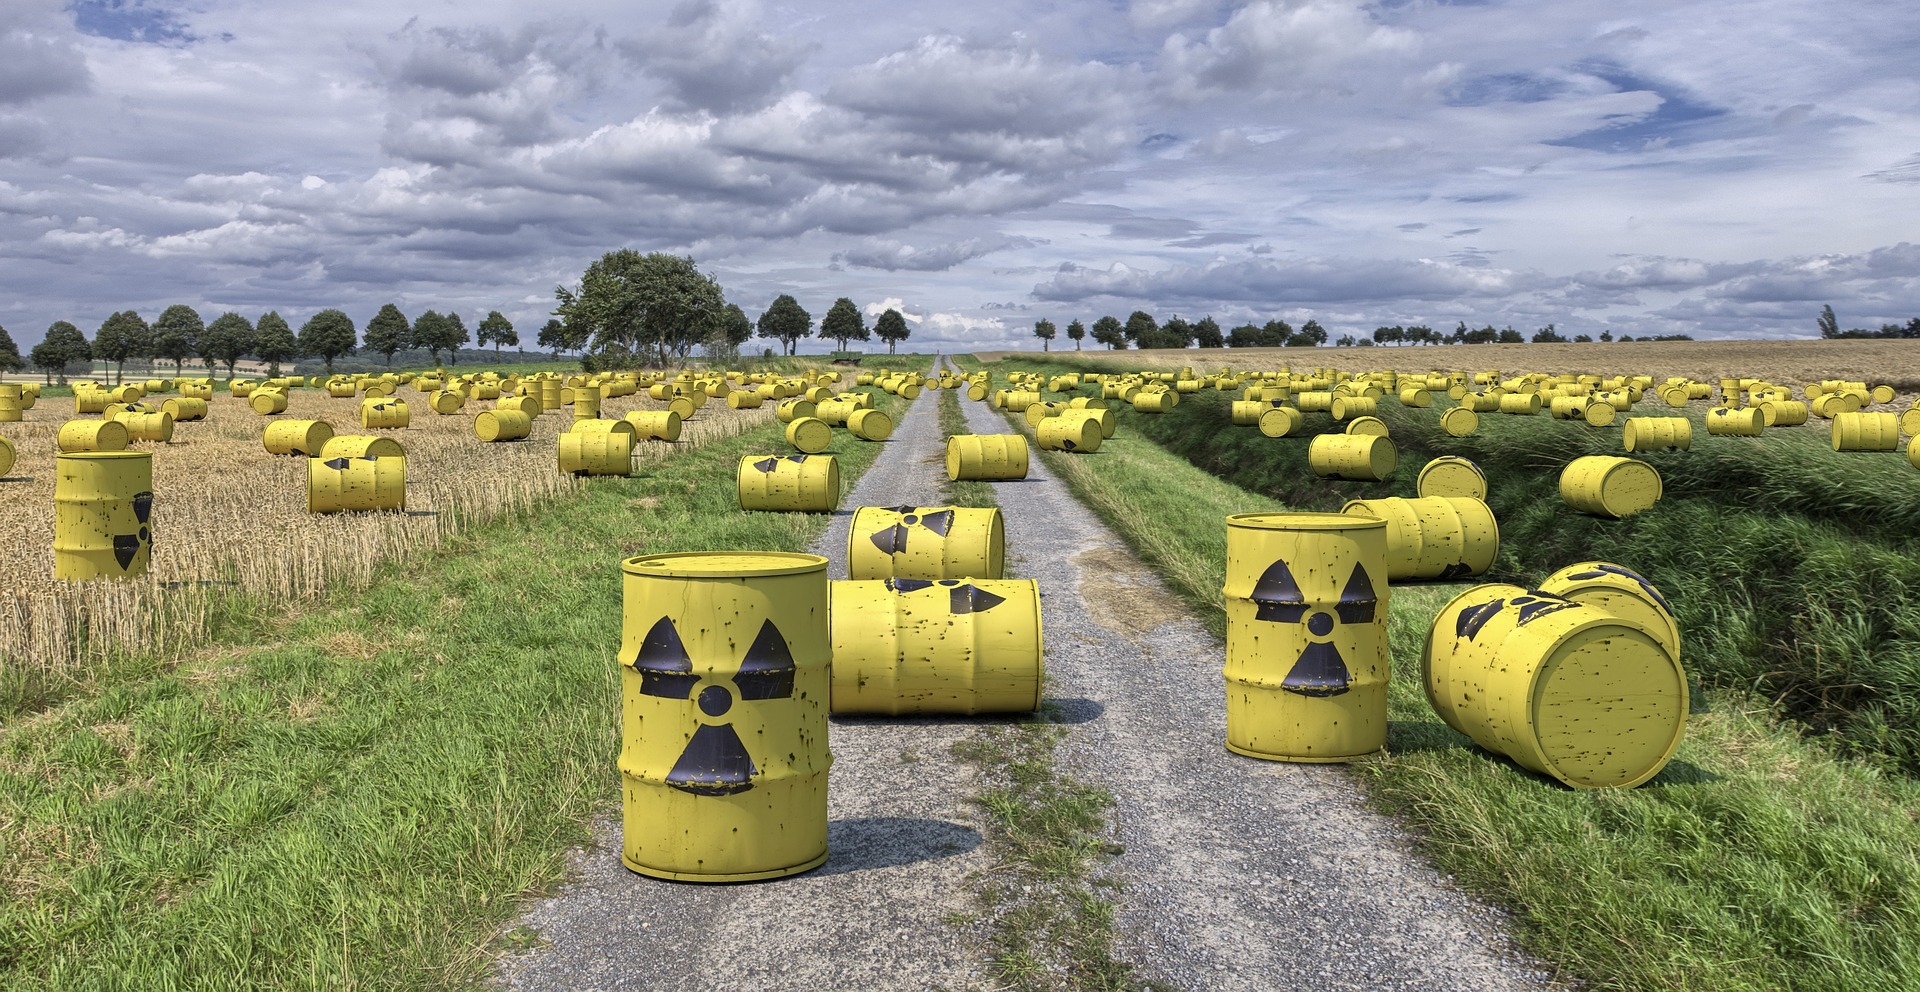 Is nuclear waste hot?